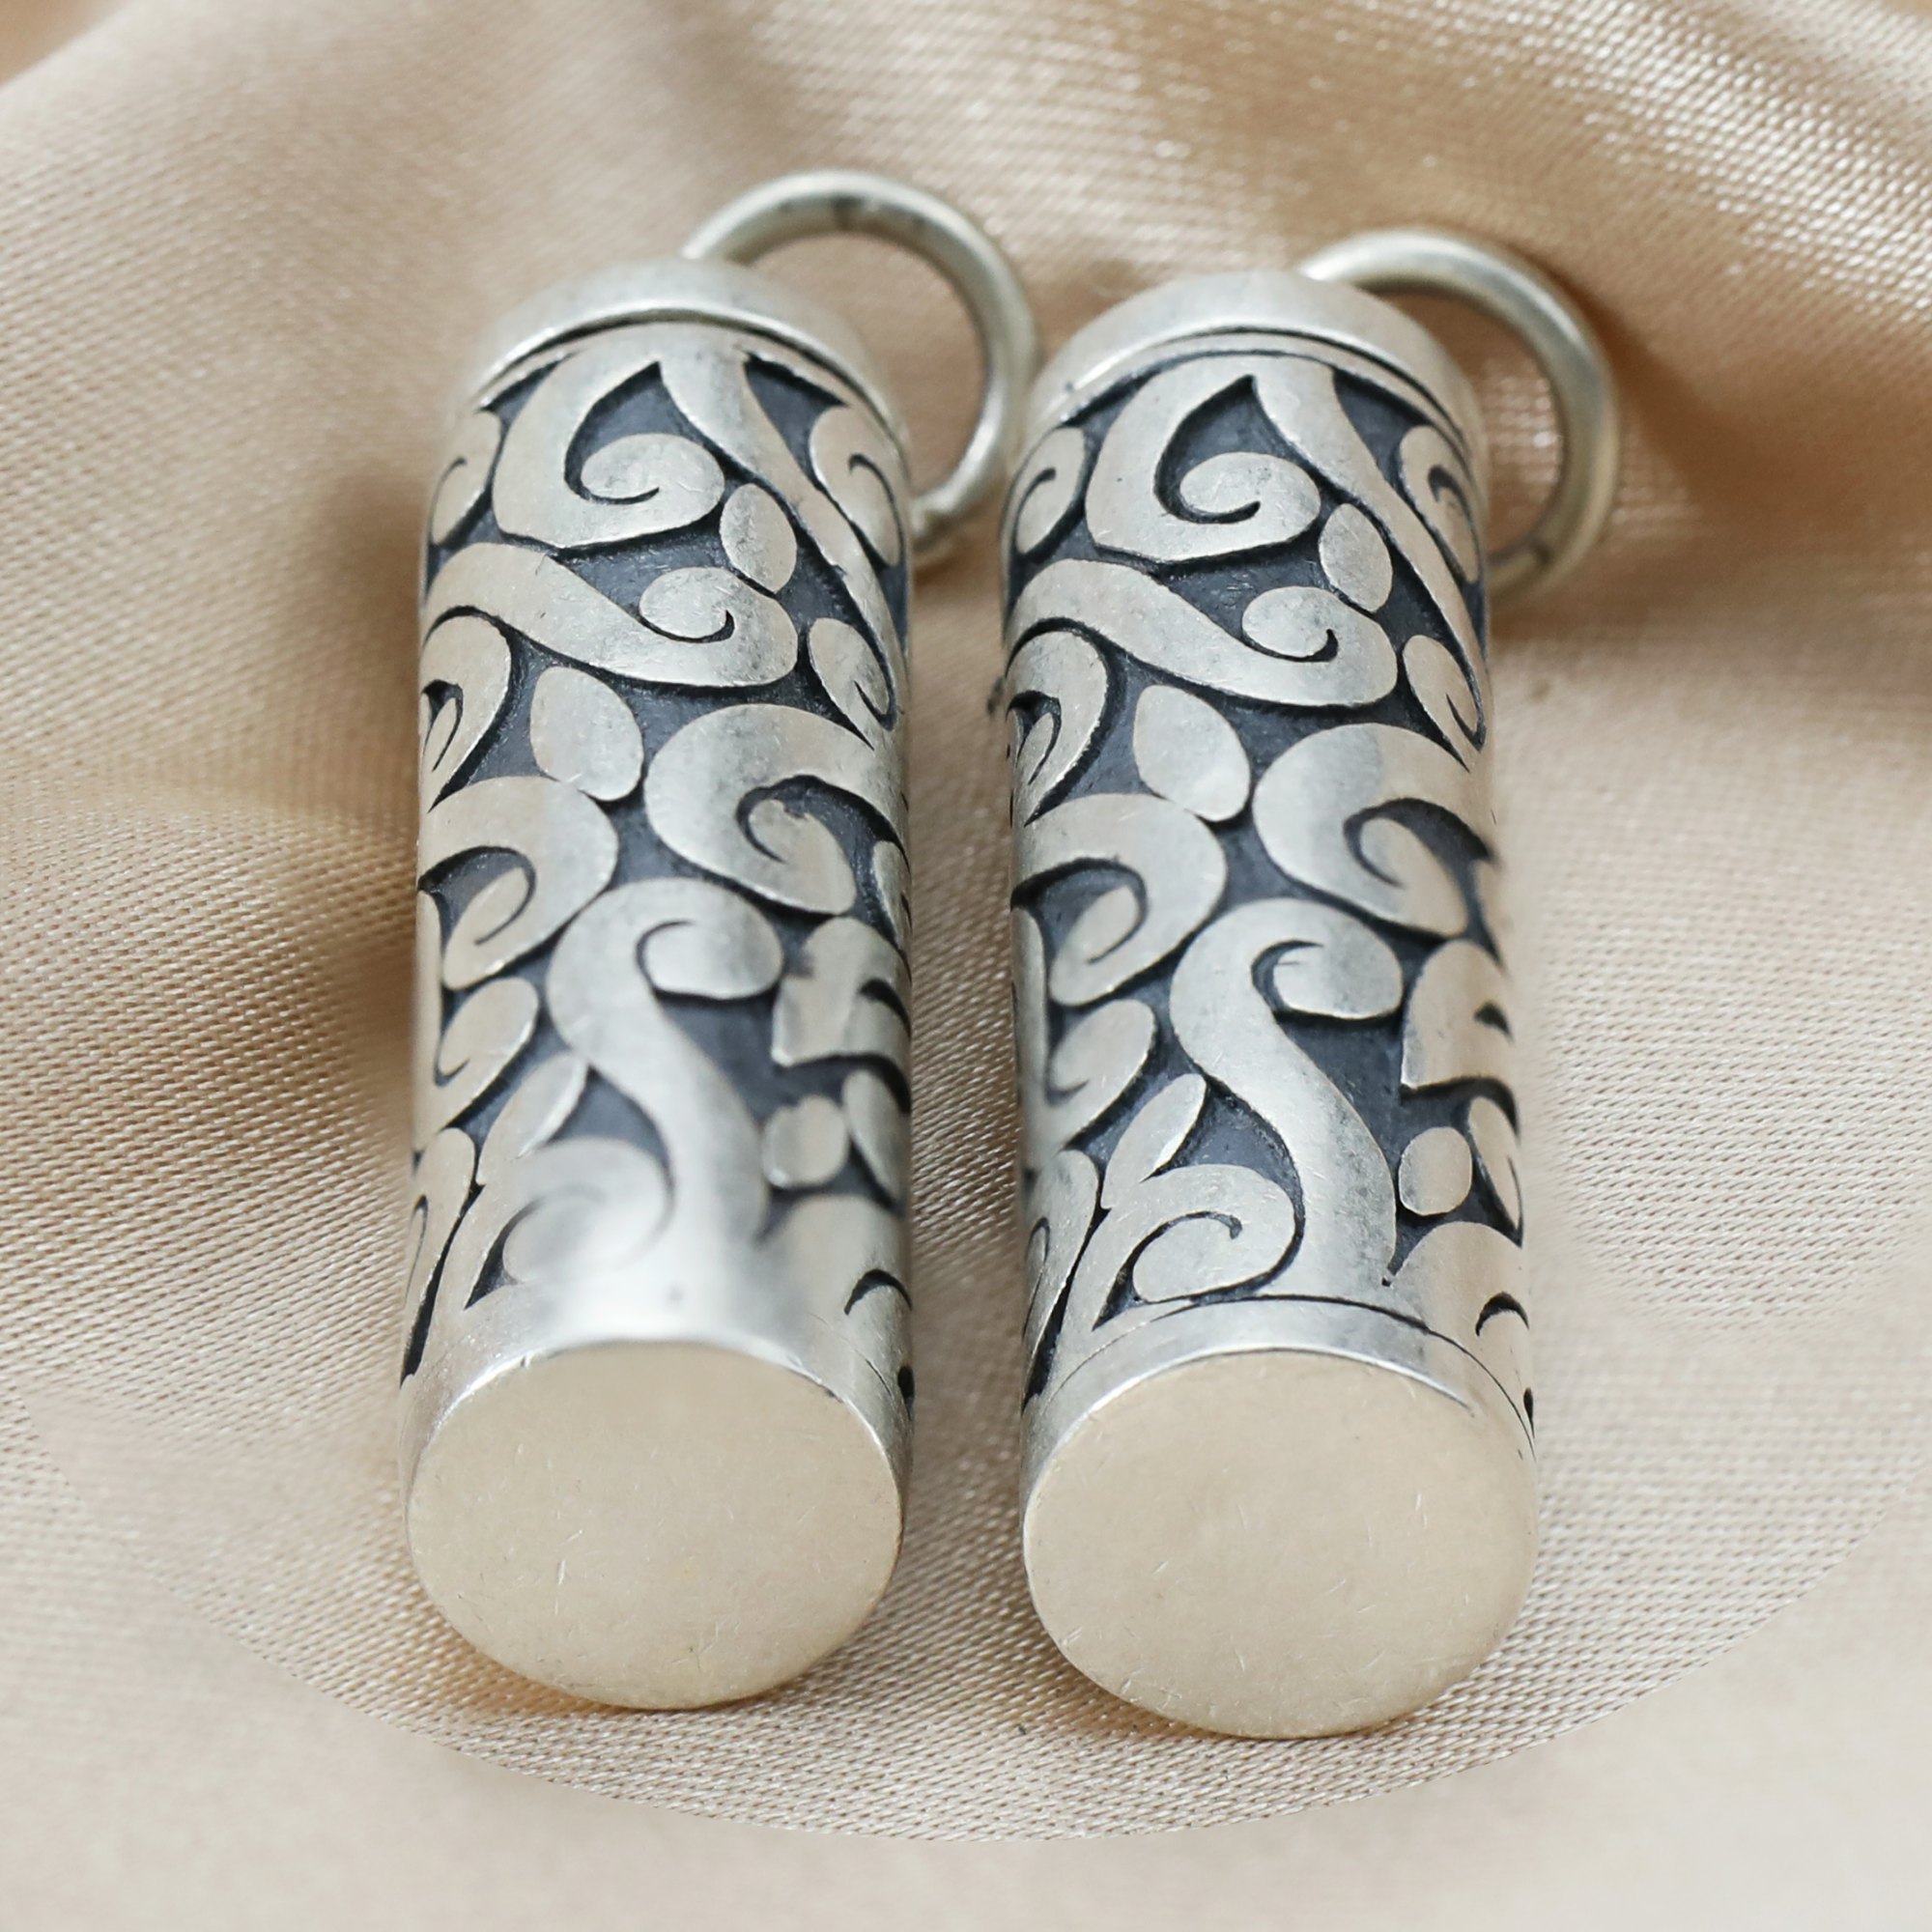 Tube Keepsake Ash Canister Cremation Urn Solid 925 Sterling Silver Wish Vial Pendant Prayer Box Antiqued Silver 9x40MM 1190046 - Click Image to Close